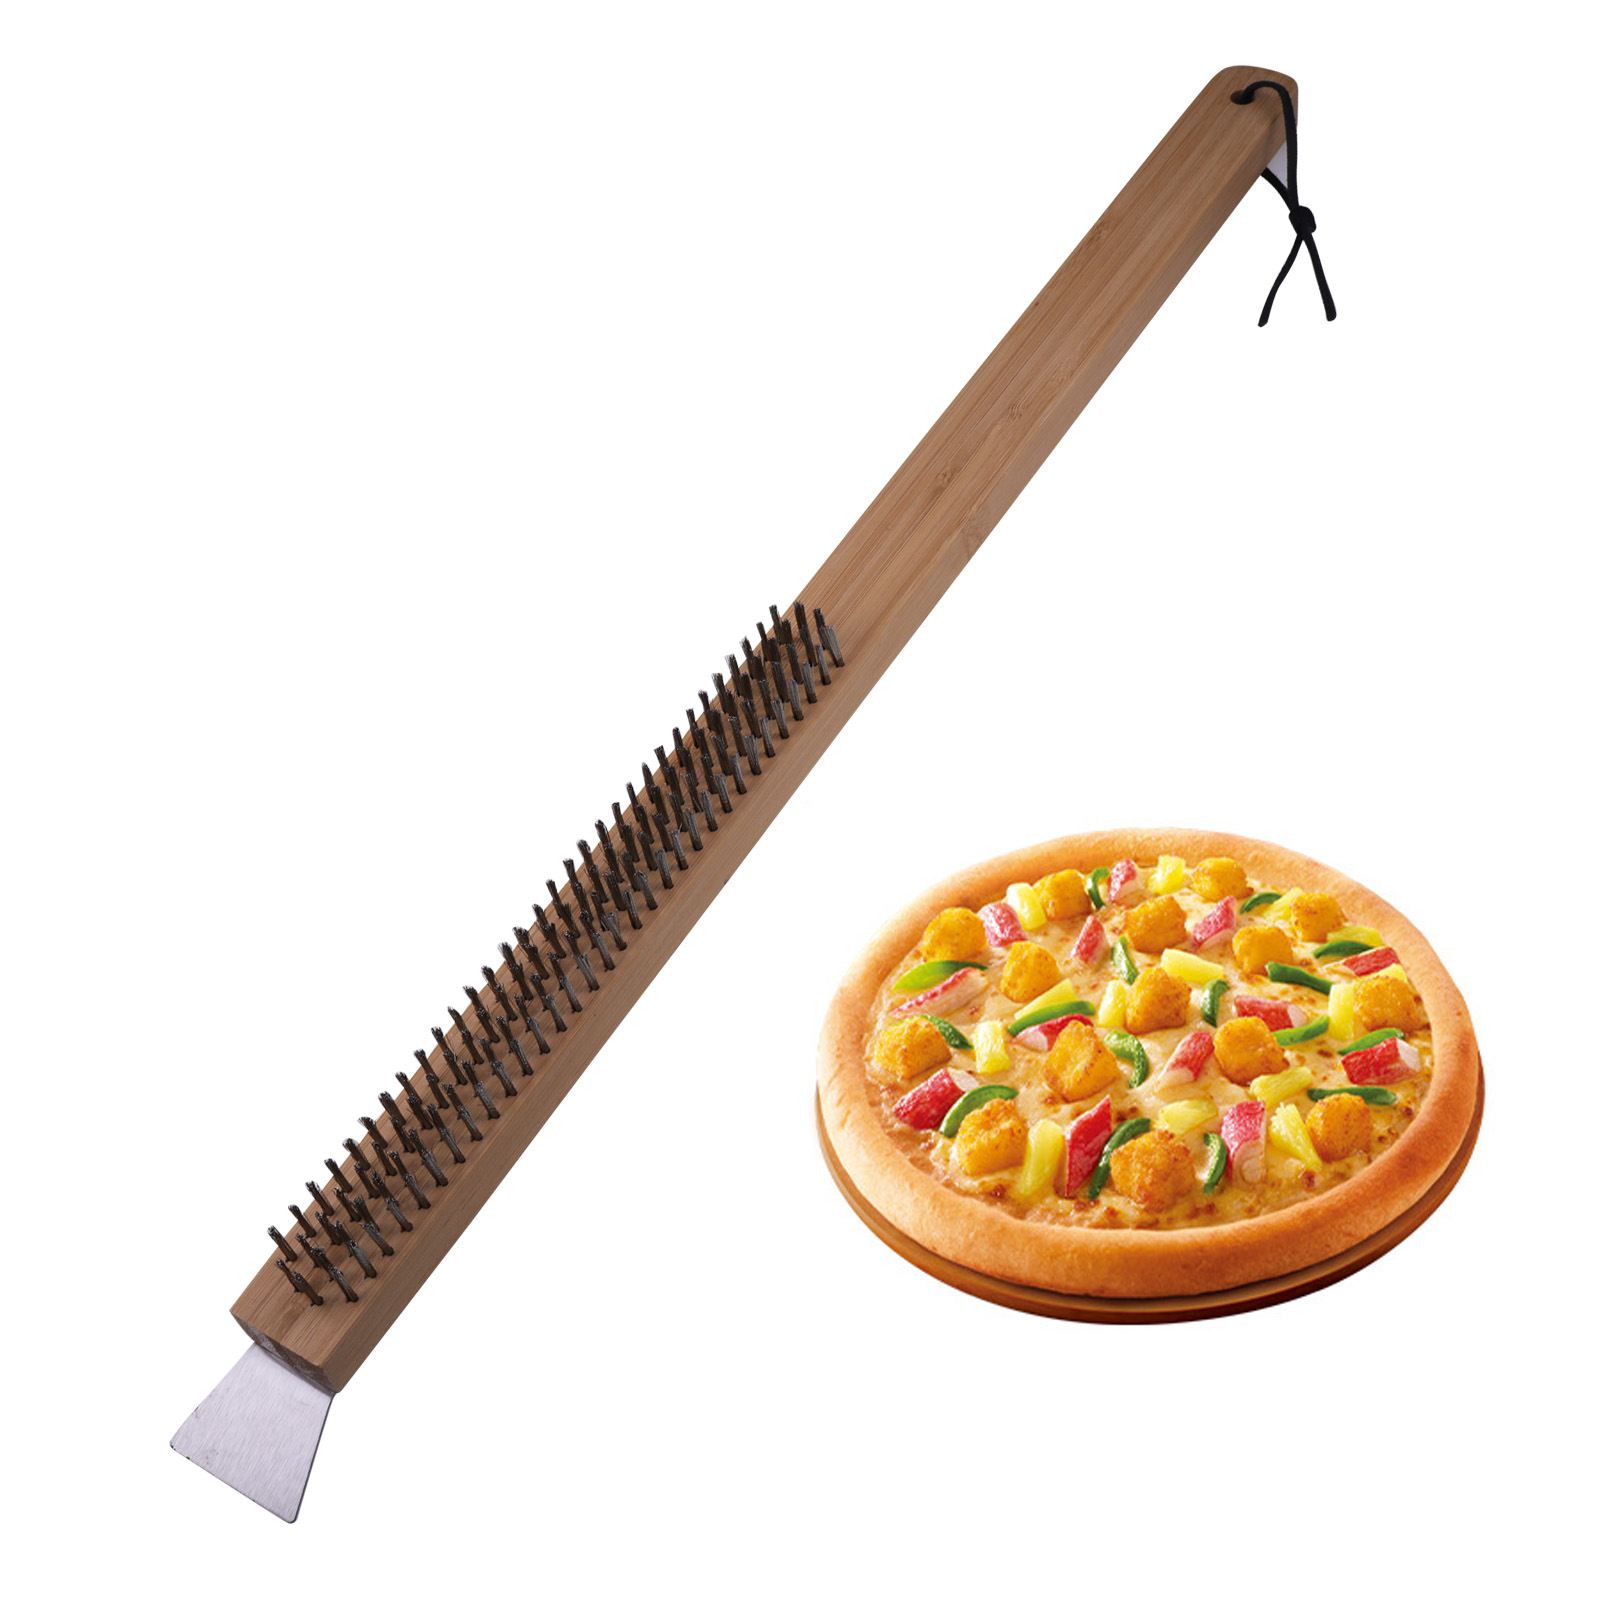 Pizza Oven Brush, Pizza Stone Cleaning Brush with Scraper, Outdoor Pizza Oven Accessories - image 1 of 7